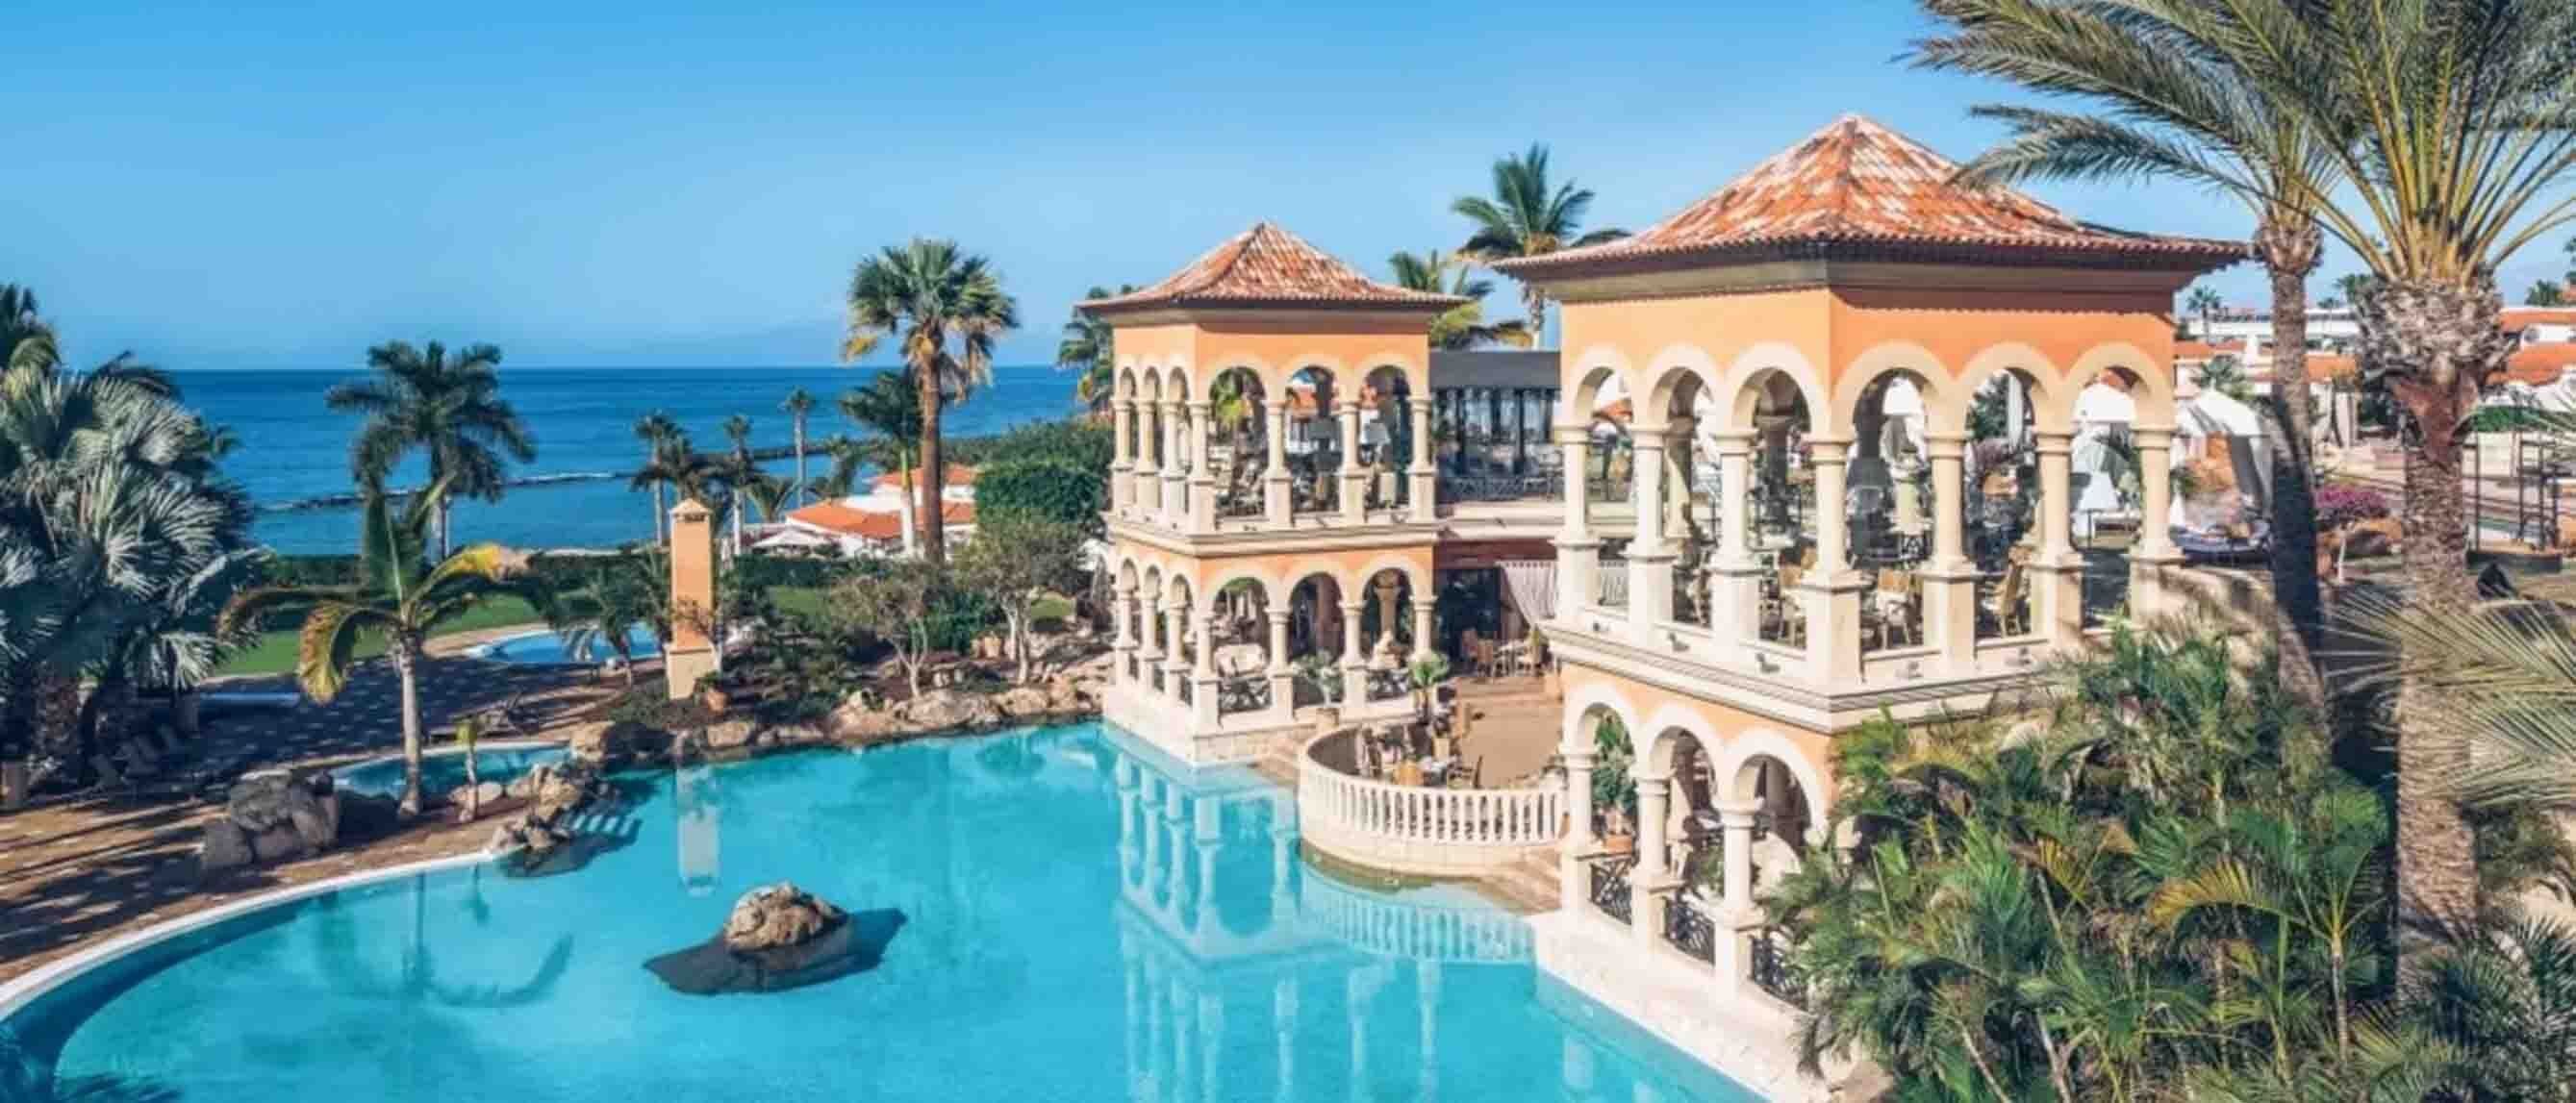 Our scoop on the best Tenerife hotels for UK travellers?